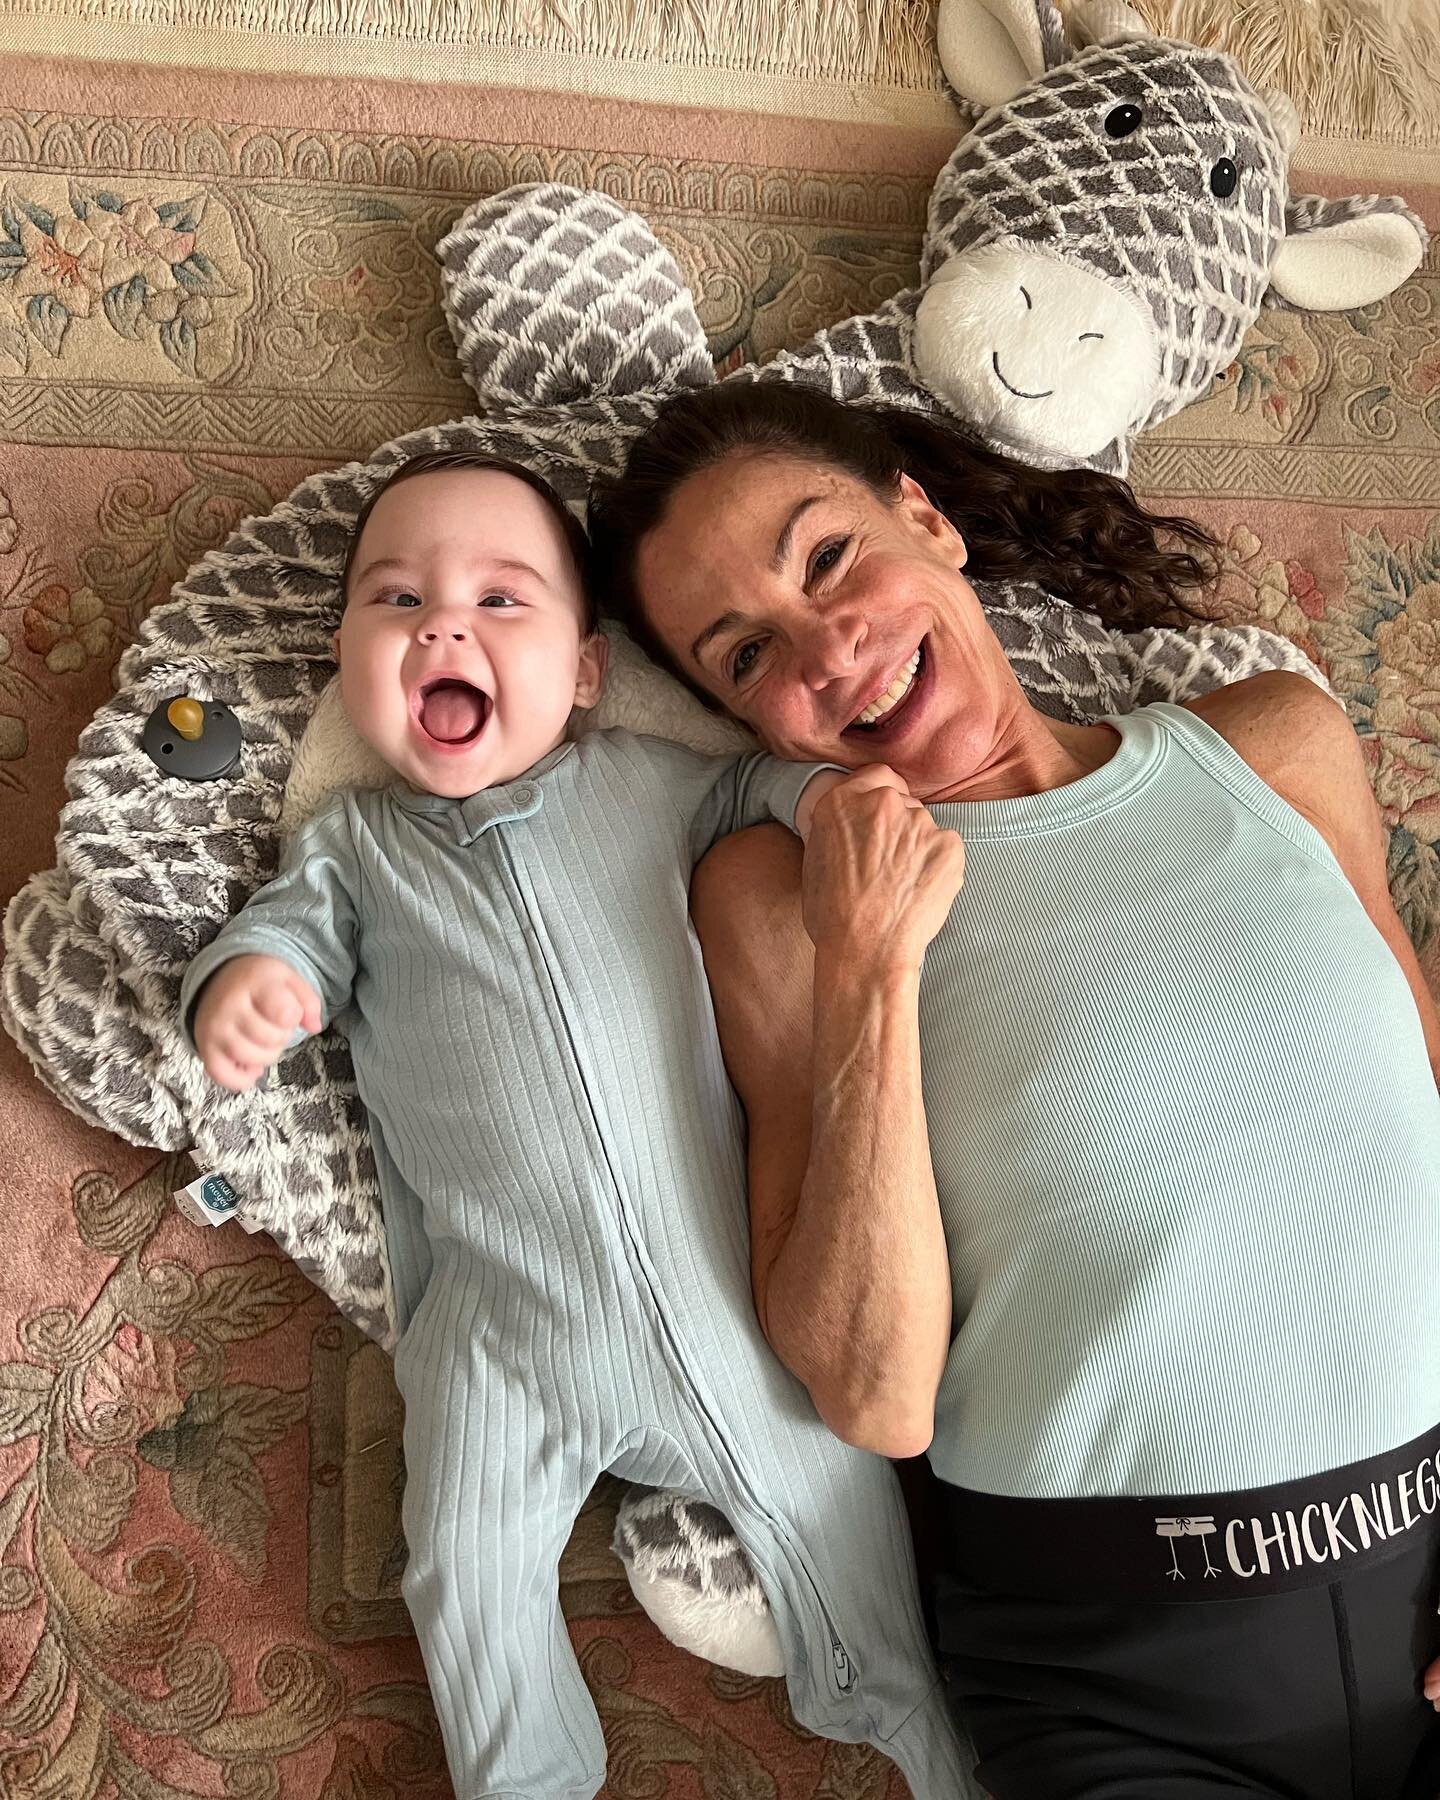 &ldquo;Let the children&rsquo;s laughter, remind us how we used to be&rdquo; 

The joy of grand parenthood, love my Lilly @lillyservinglooks 

#ilovemygranddaughter #ilovemykids #familyiseverything #blessed 

@whitneyhouston